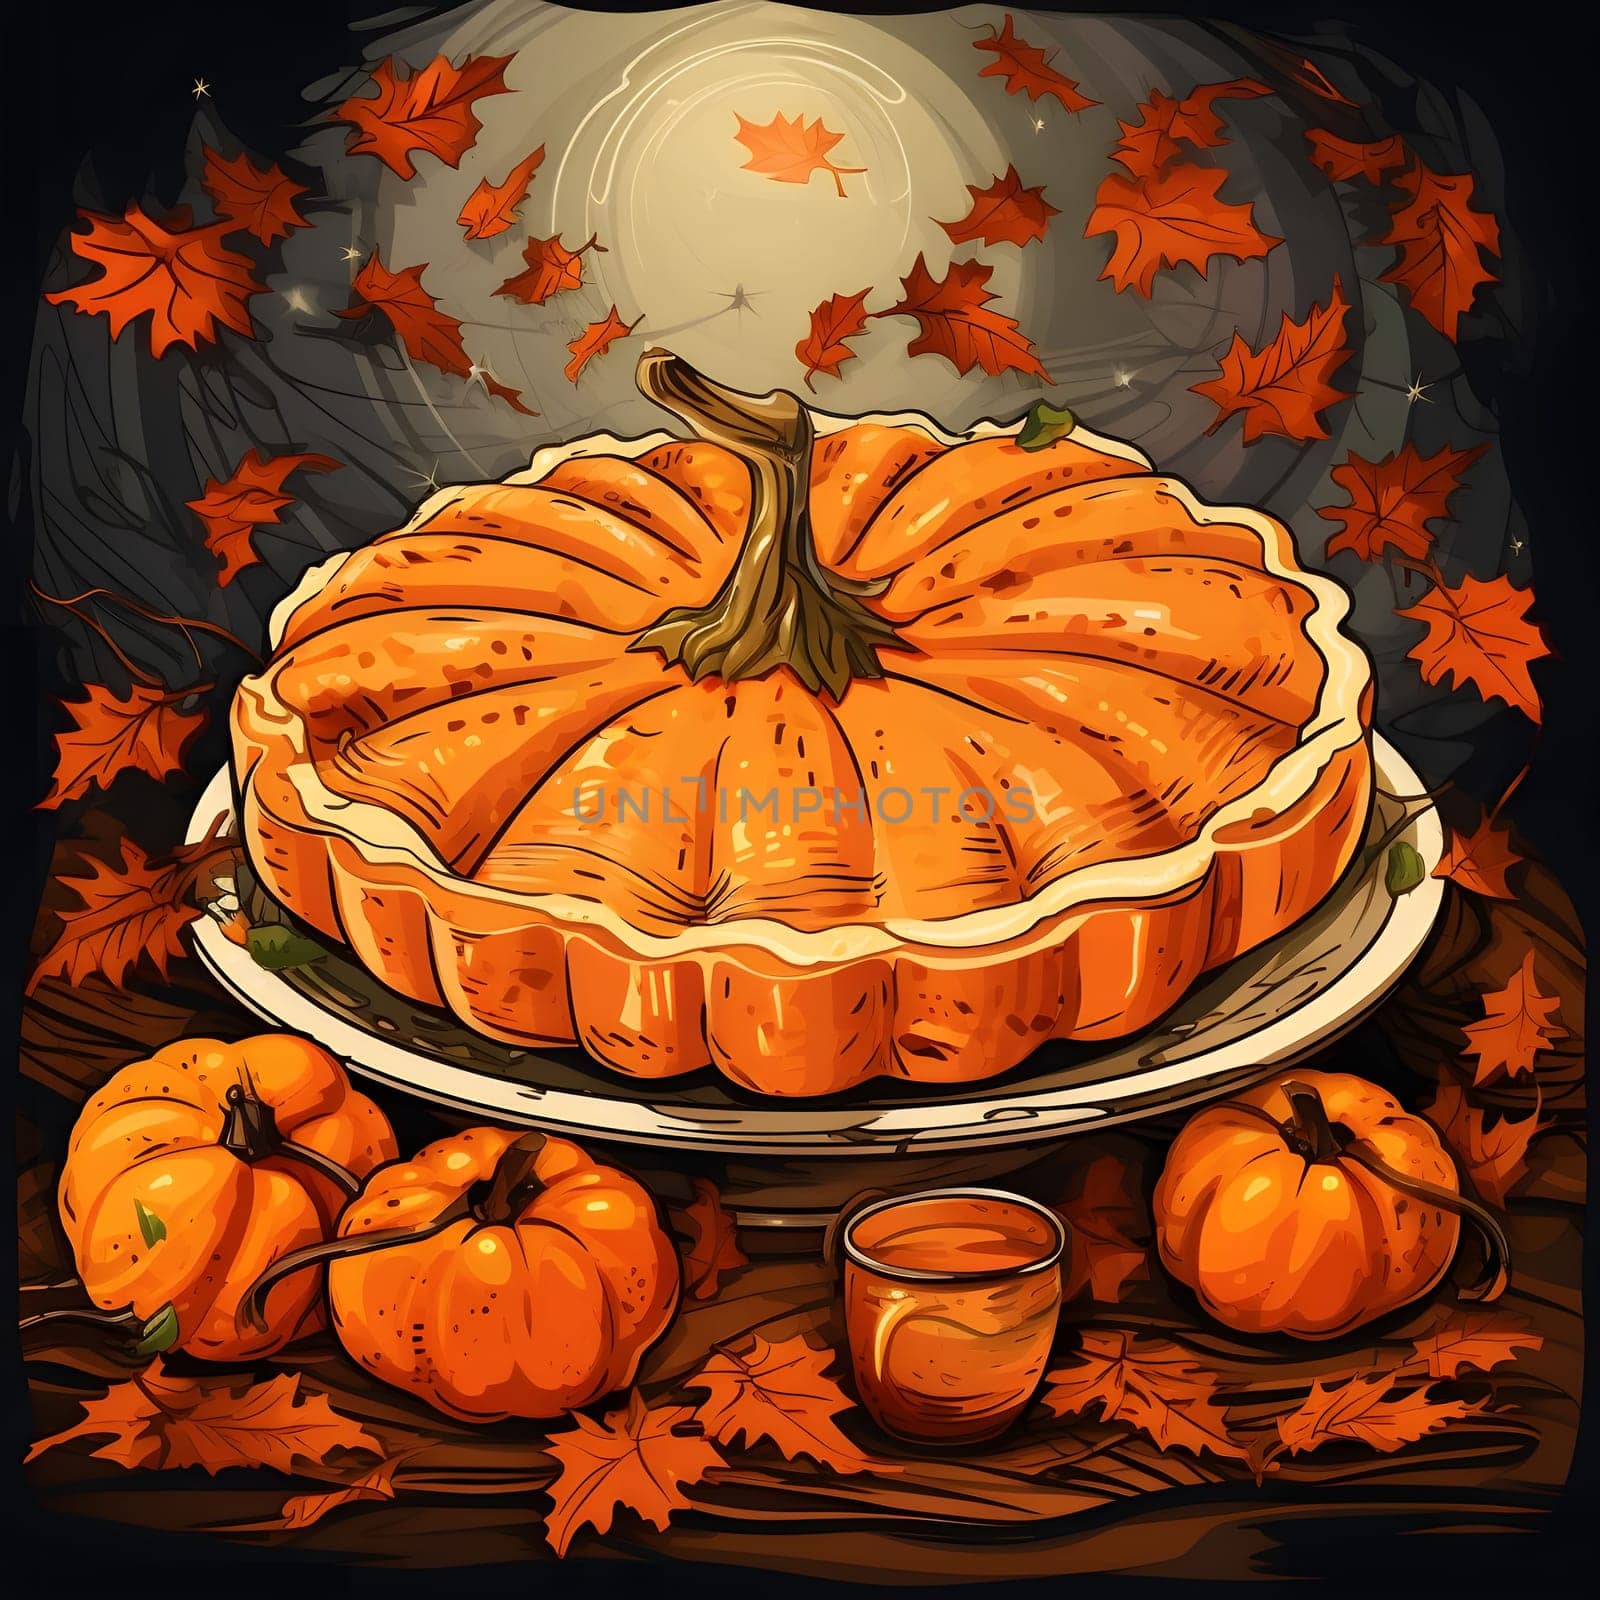 Illustration of pumpkin pie and falling leaves. Pumpkin as a dish of thanksgiving for the harvest. An atmosphere of joy and celebration.